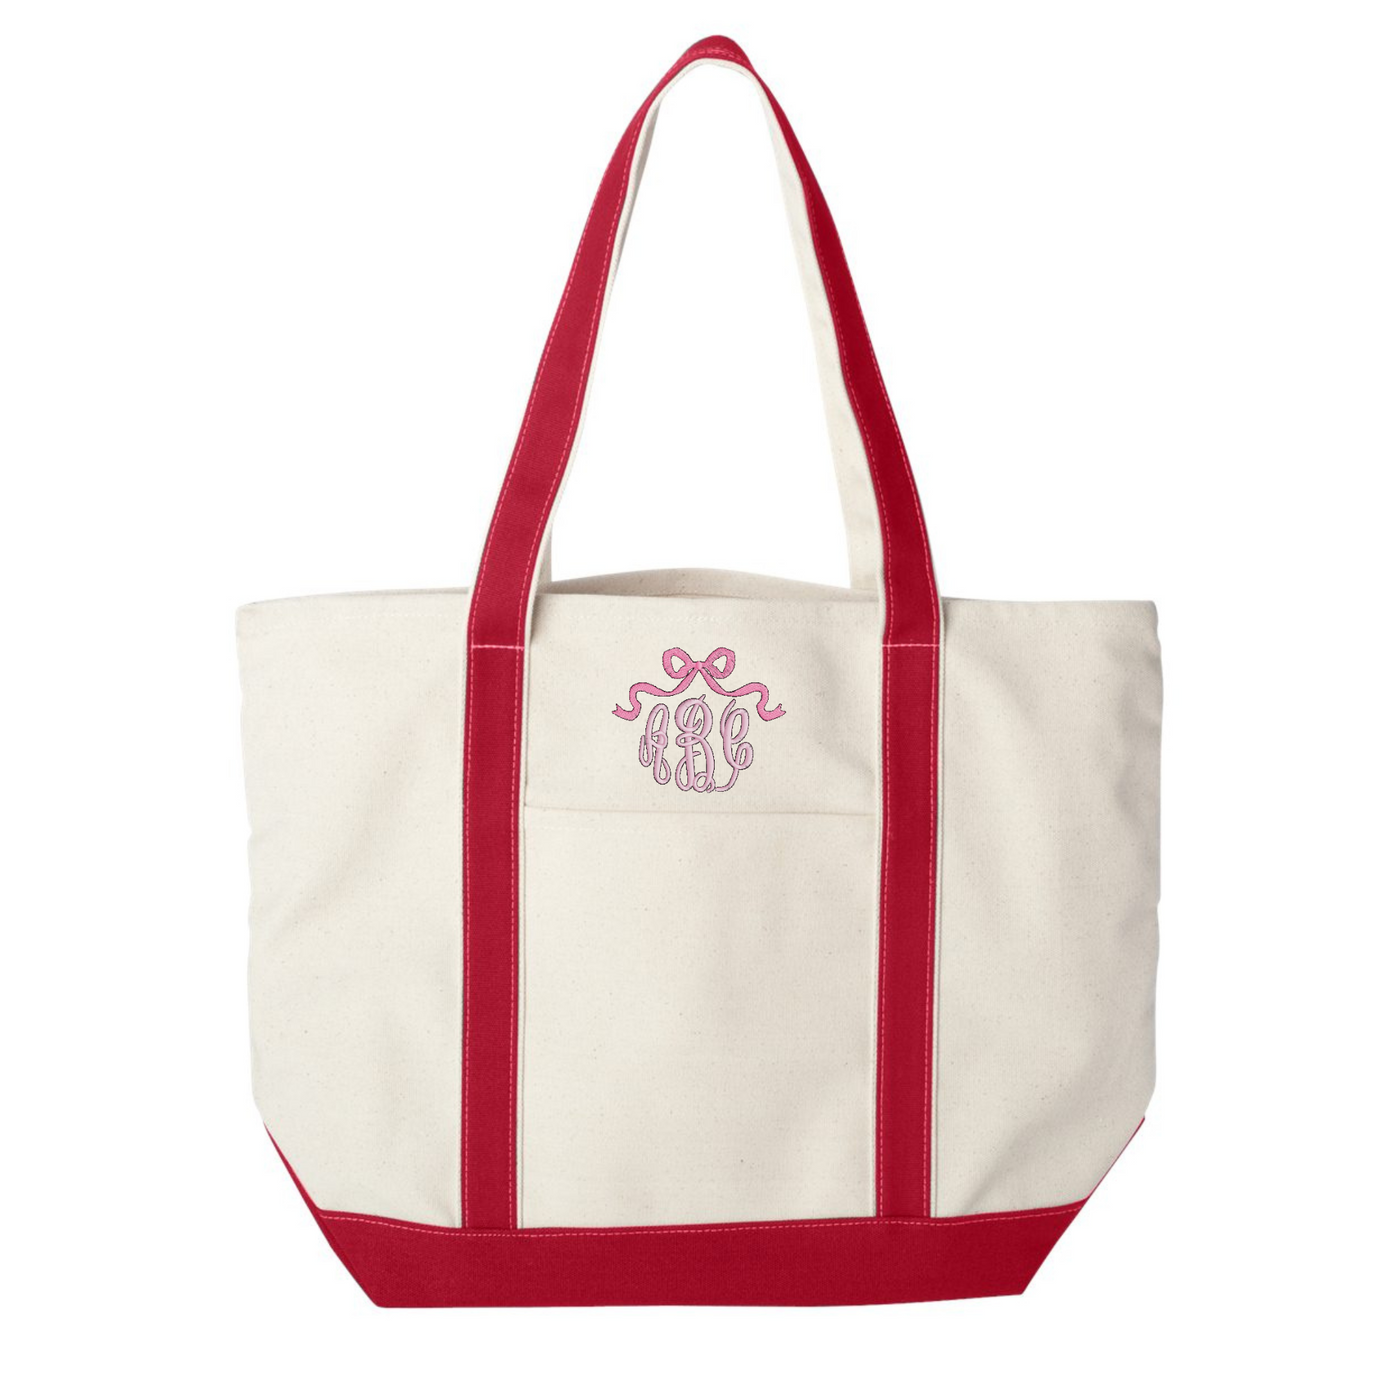 Monogrammed 'Bow' Canvas Boat Tote